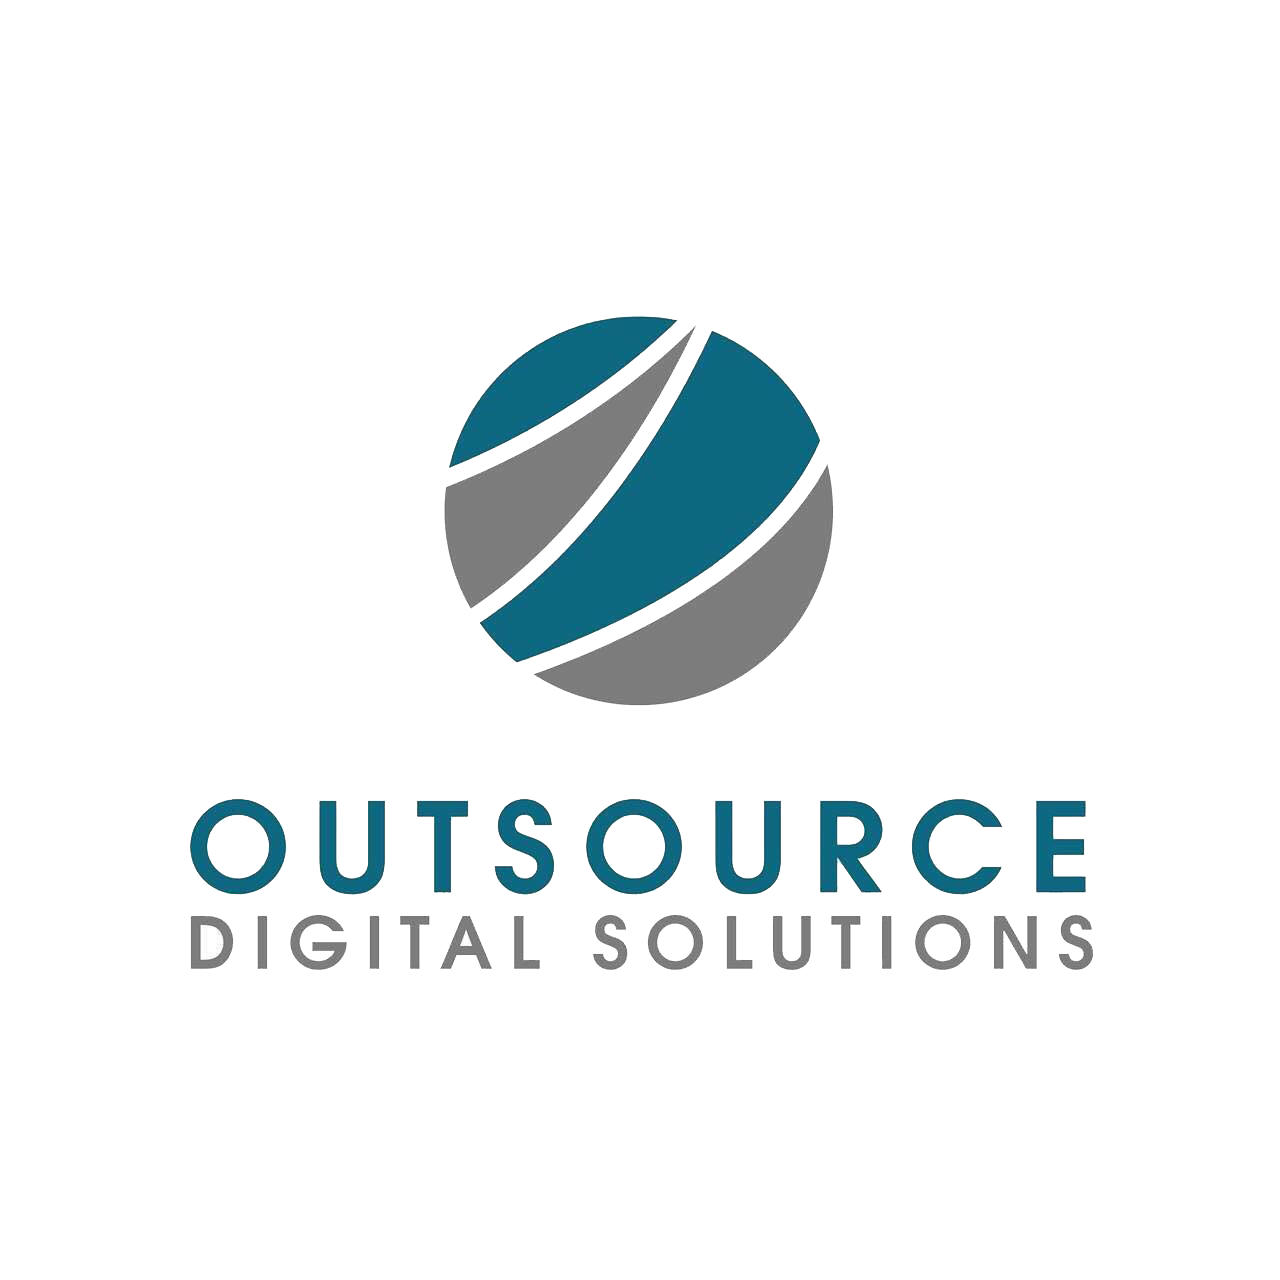 Home - Outsource Digital Solutions